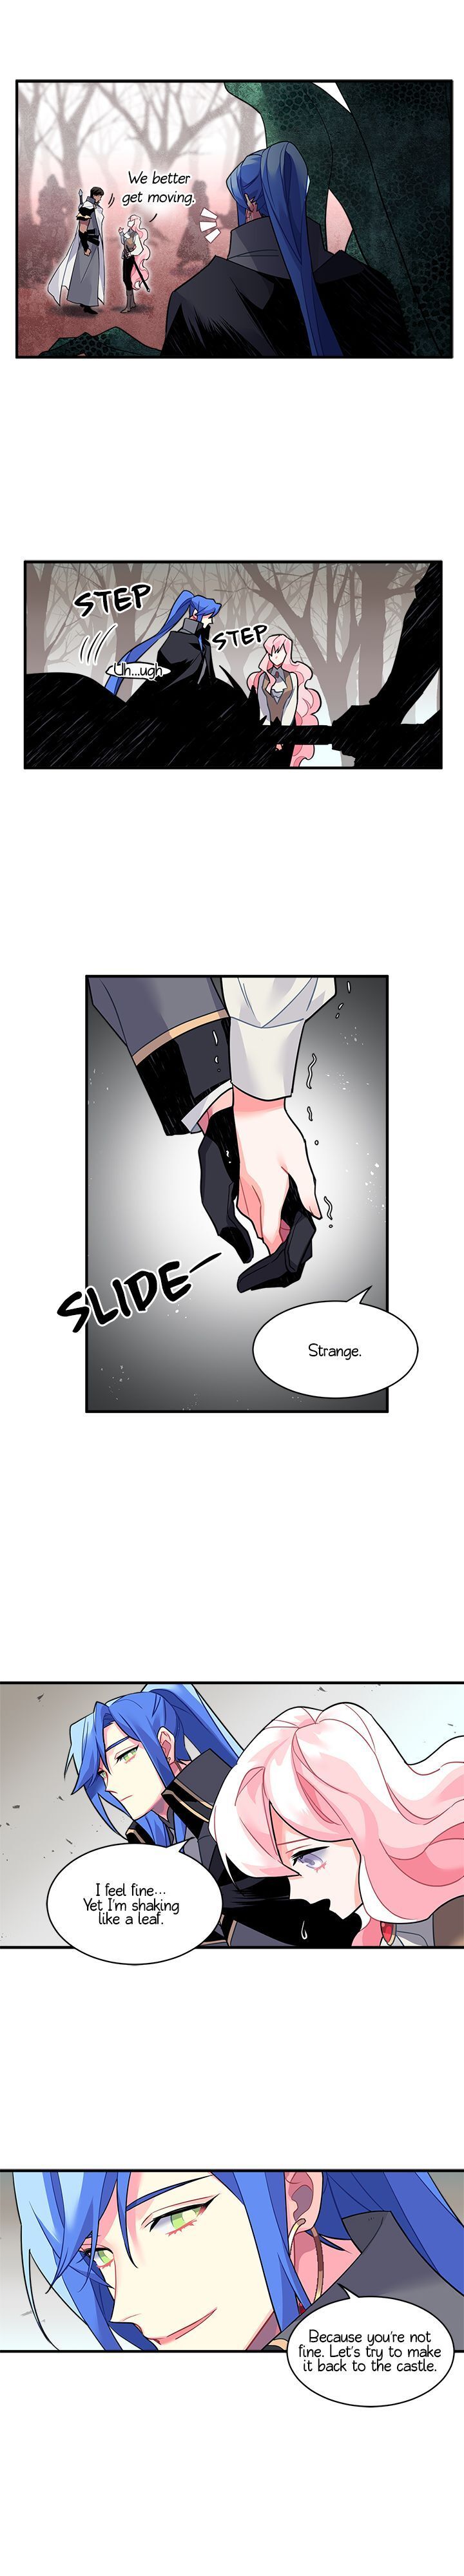 Sica Wolf Chapter 014 page 6